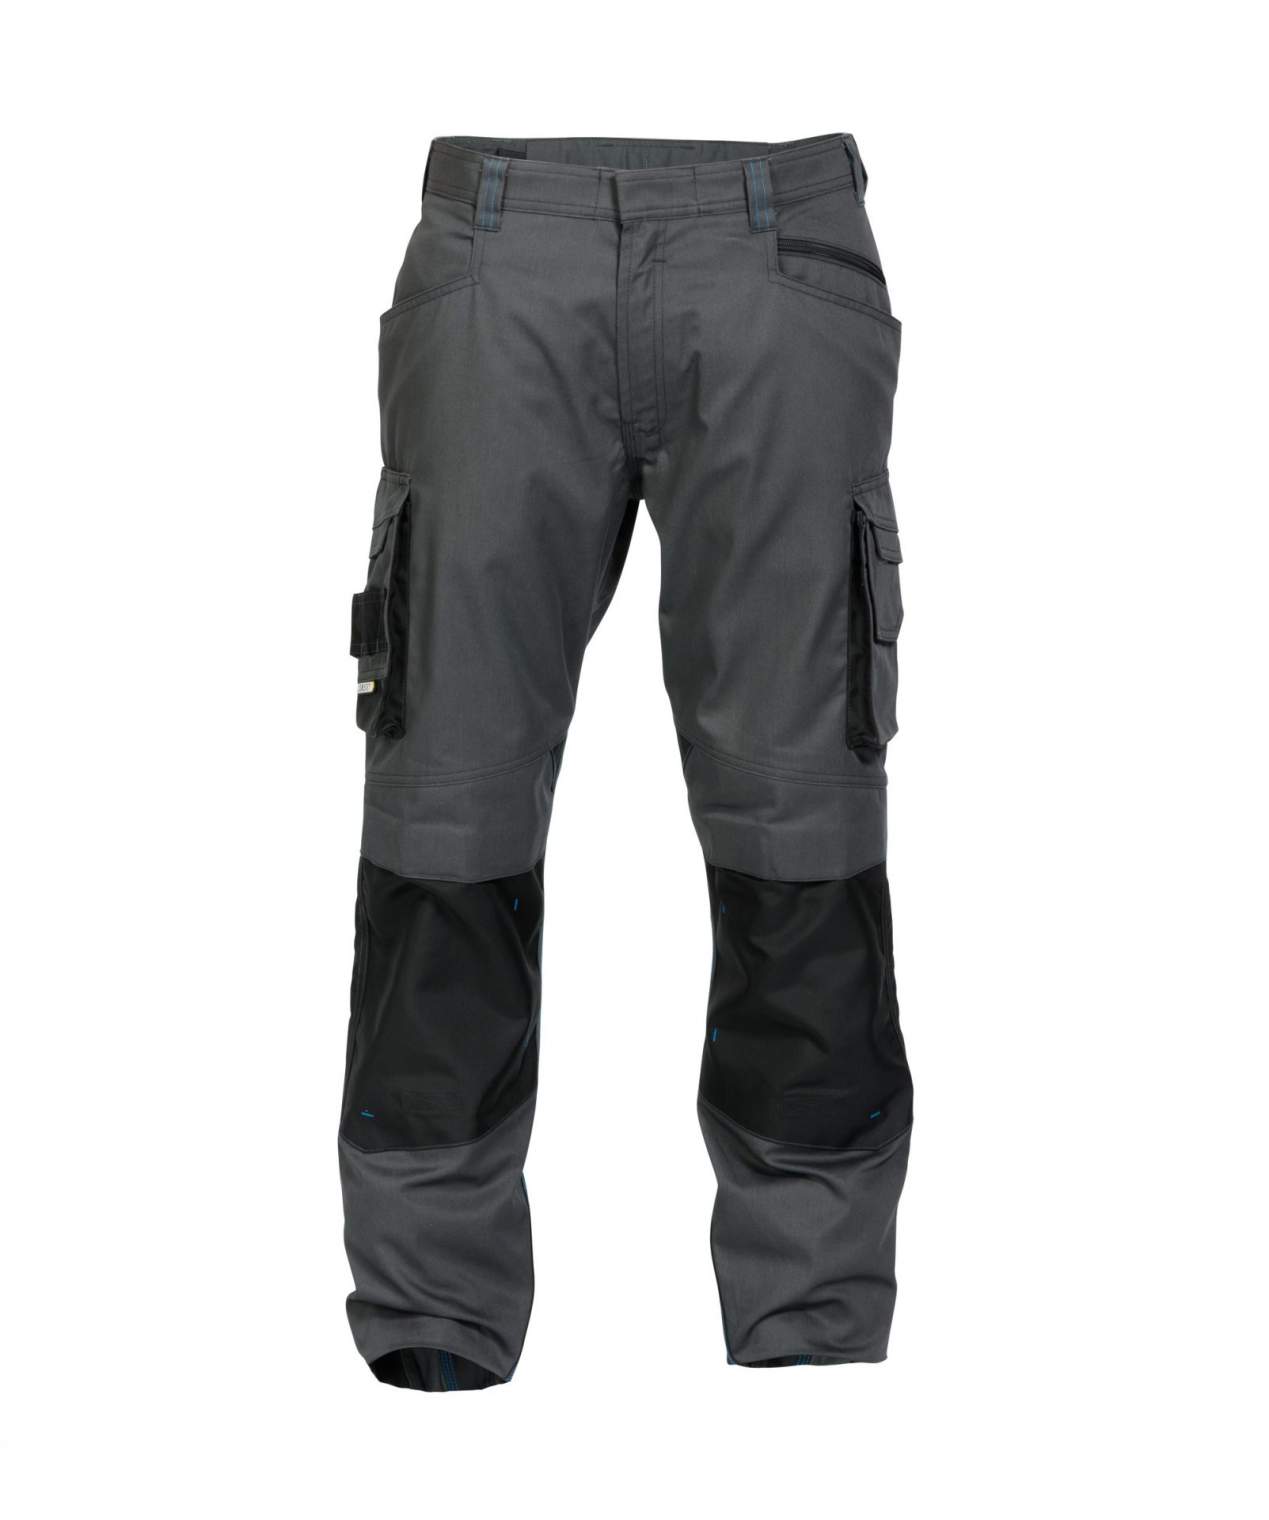 nova work trousers with knee pockets anthracite grey black front